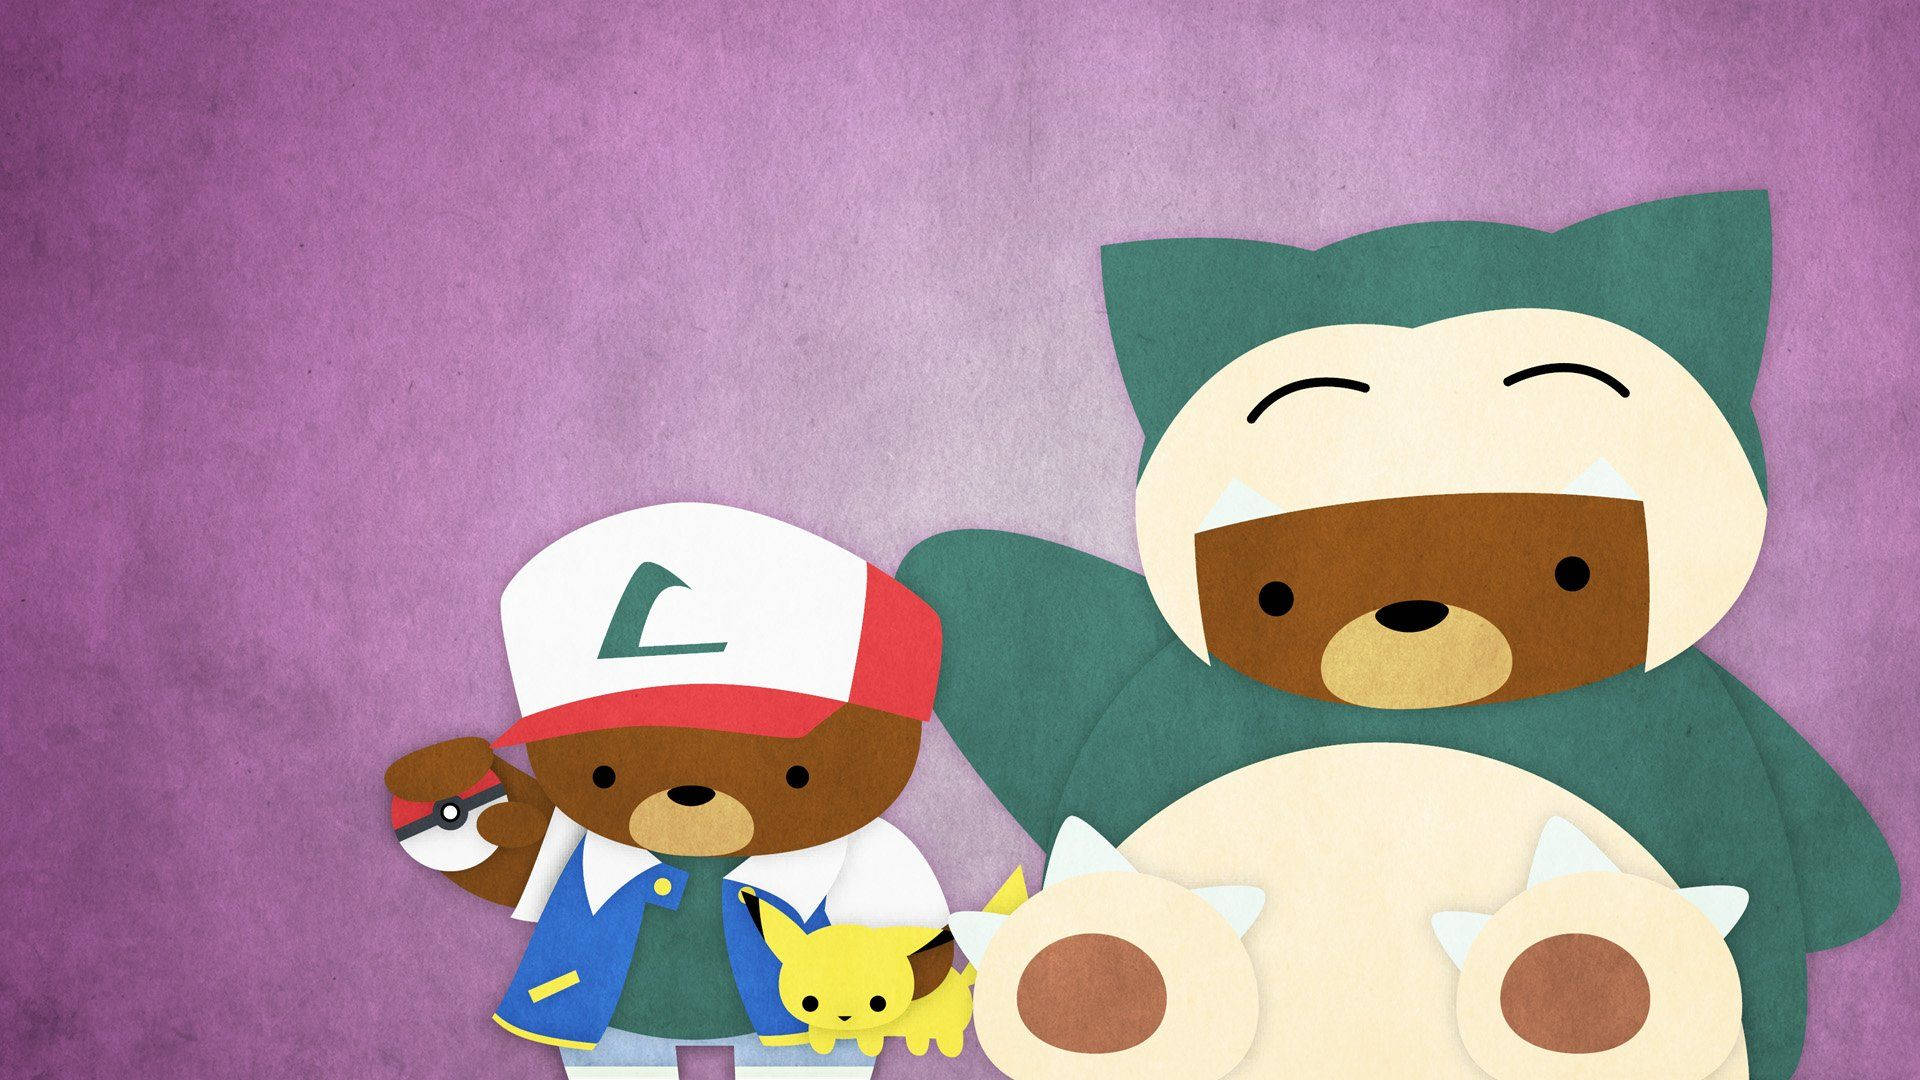 Cute Bear In Snorlax Suit